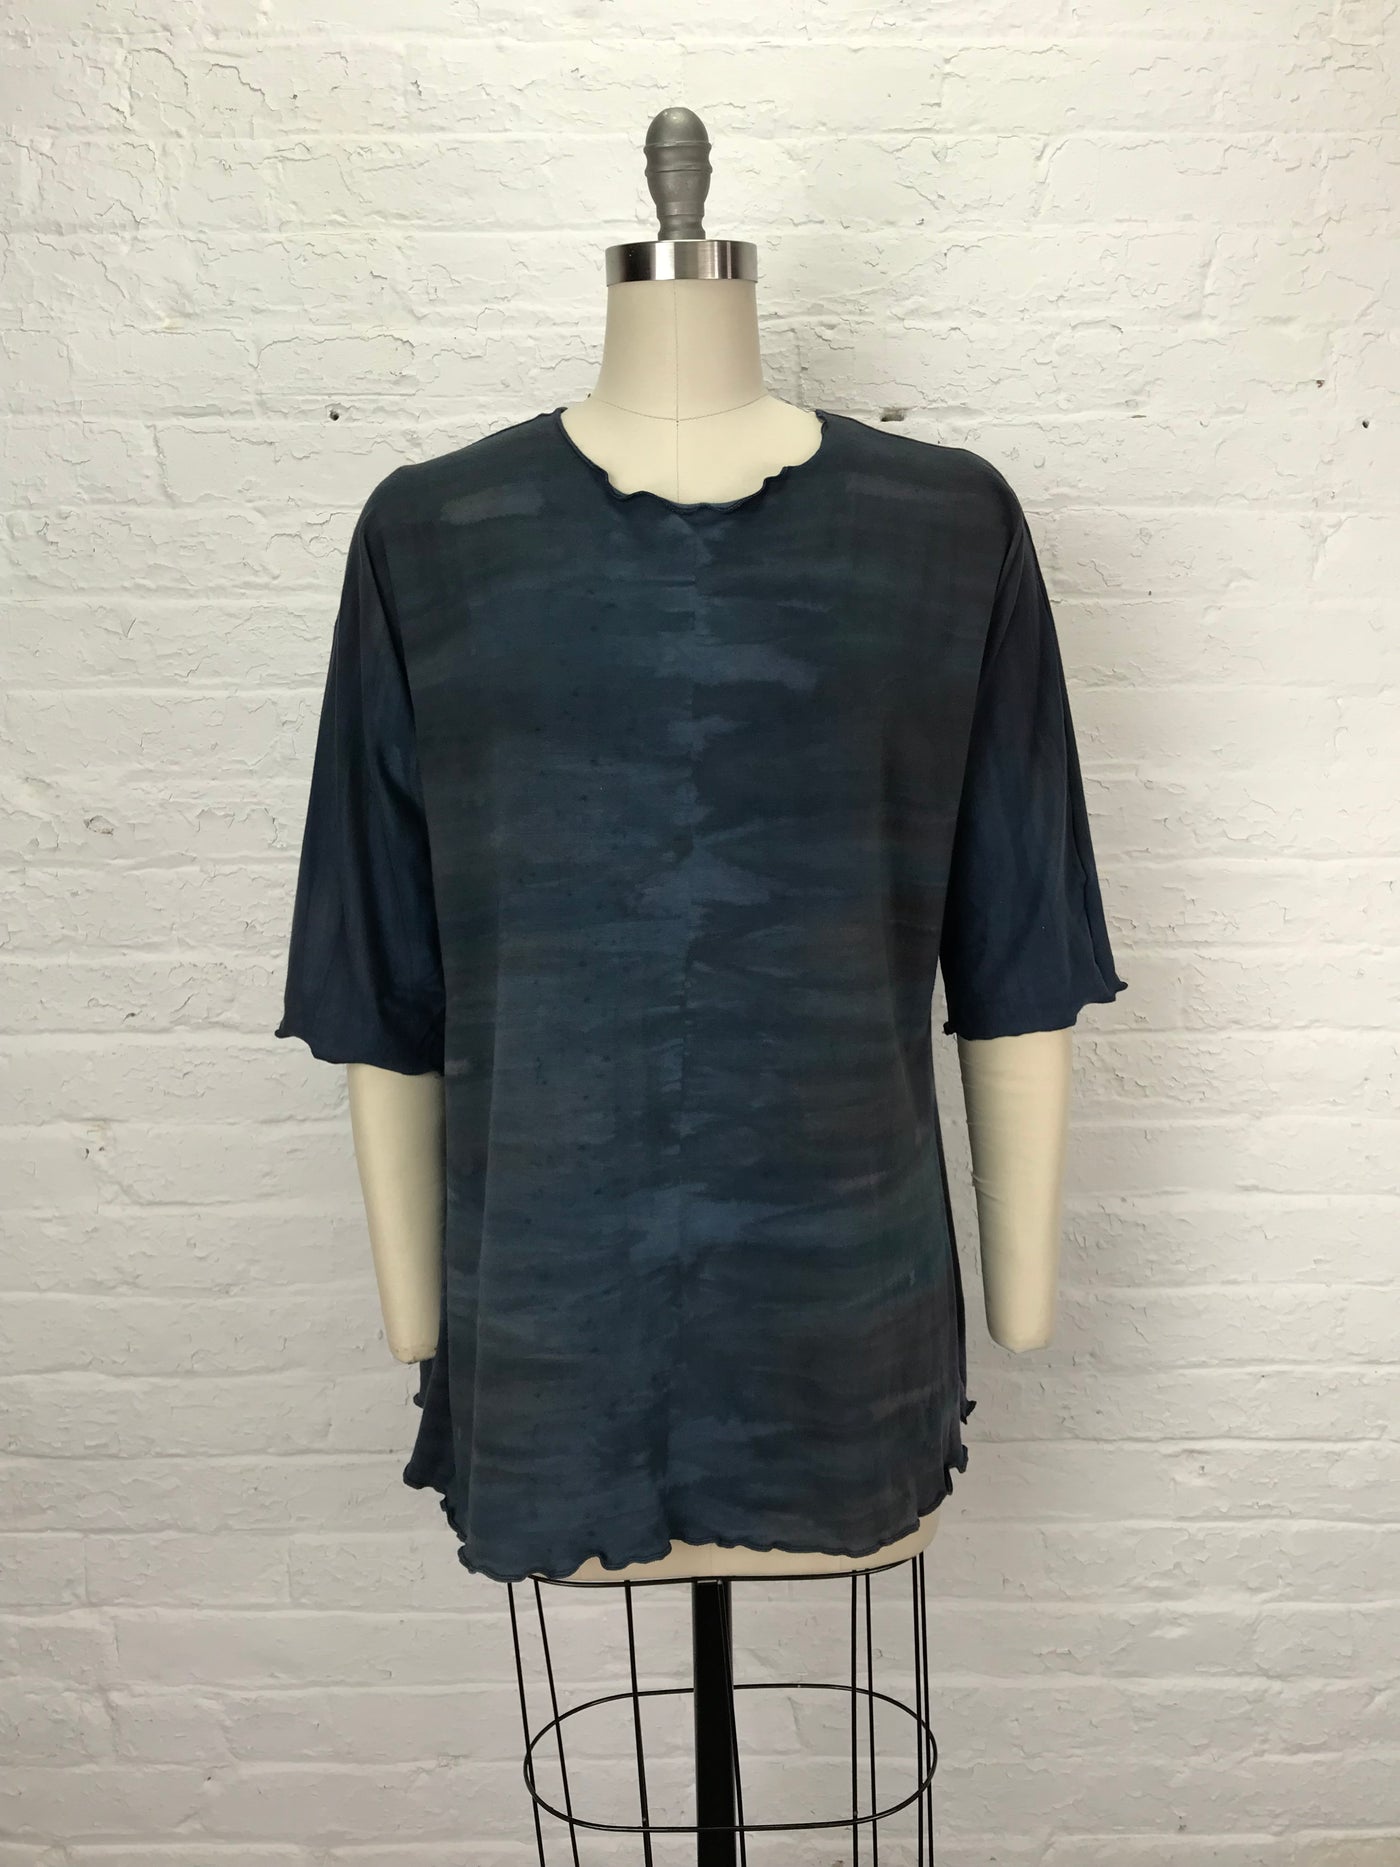 Dolman Tunic in Ink- One size